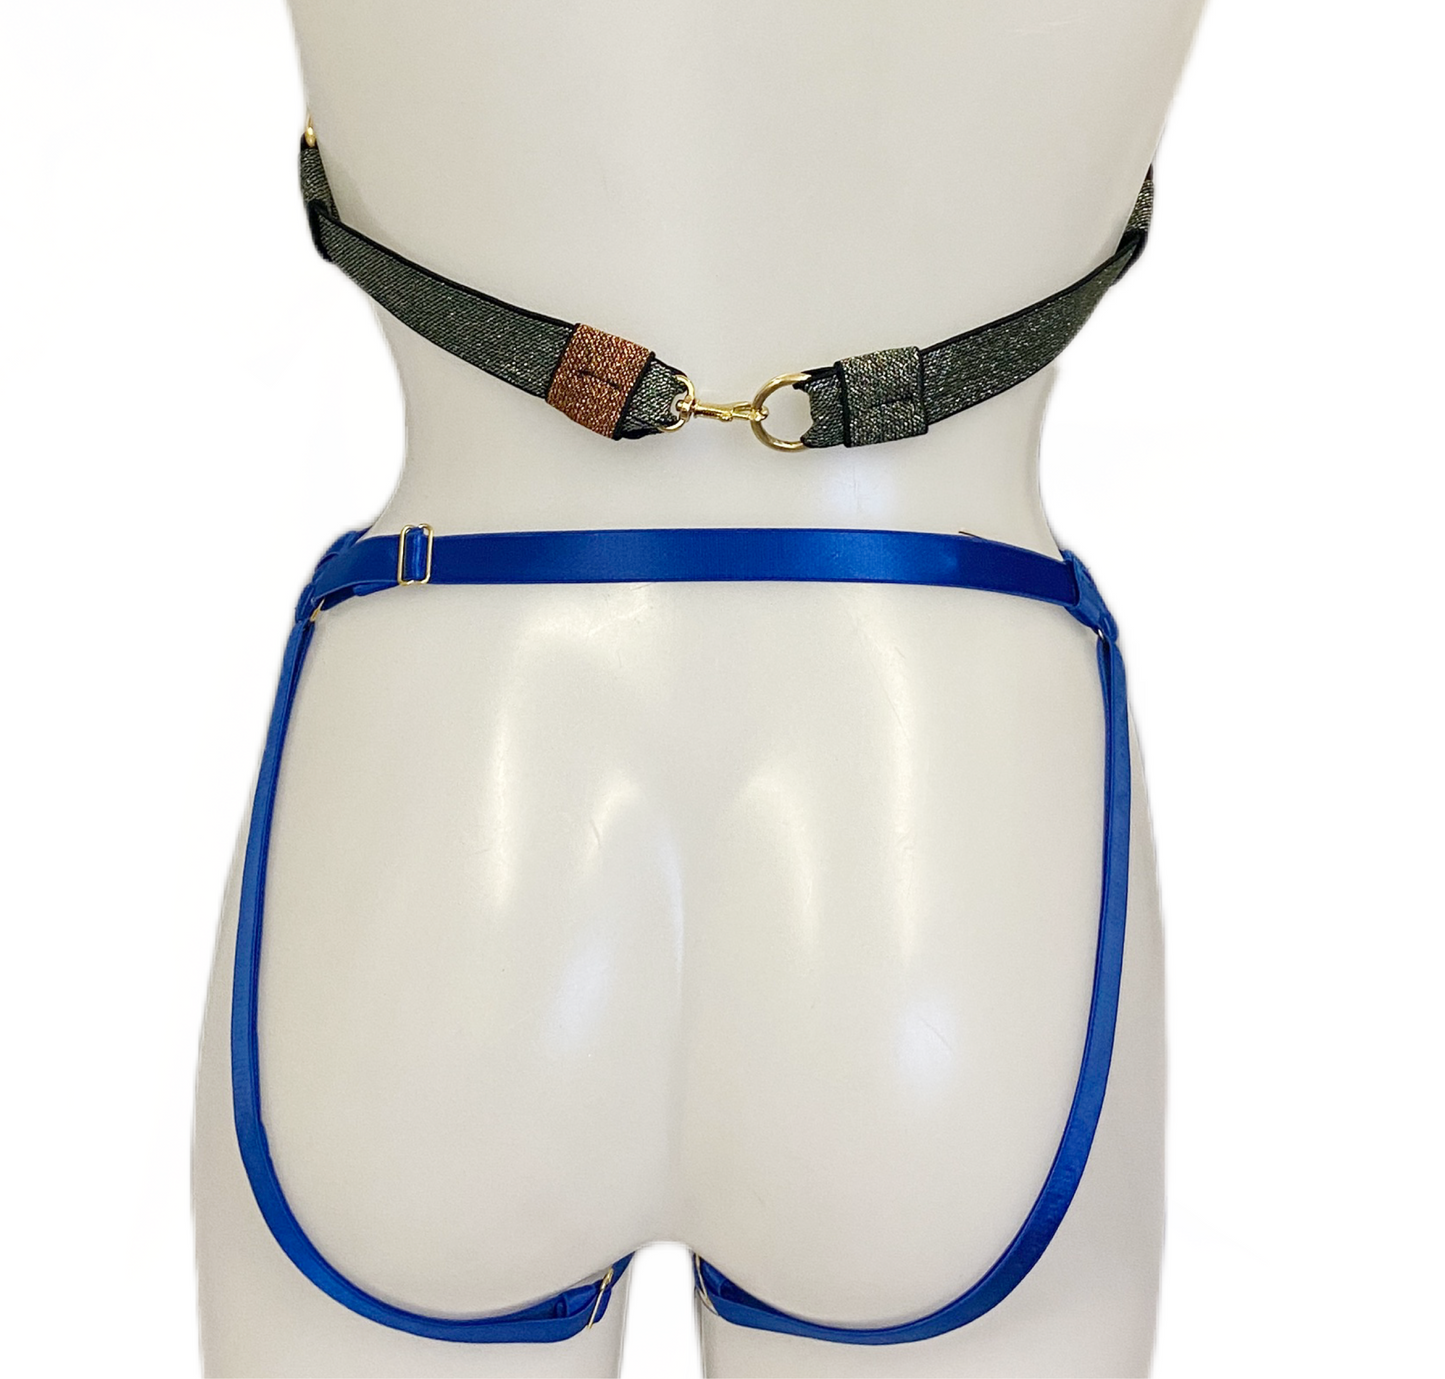 ASTRA Harness Bottoms, Blue, s/m